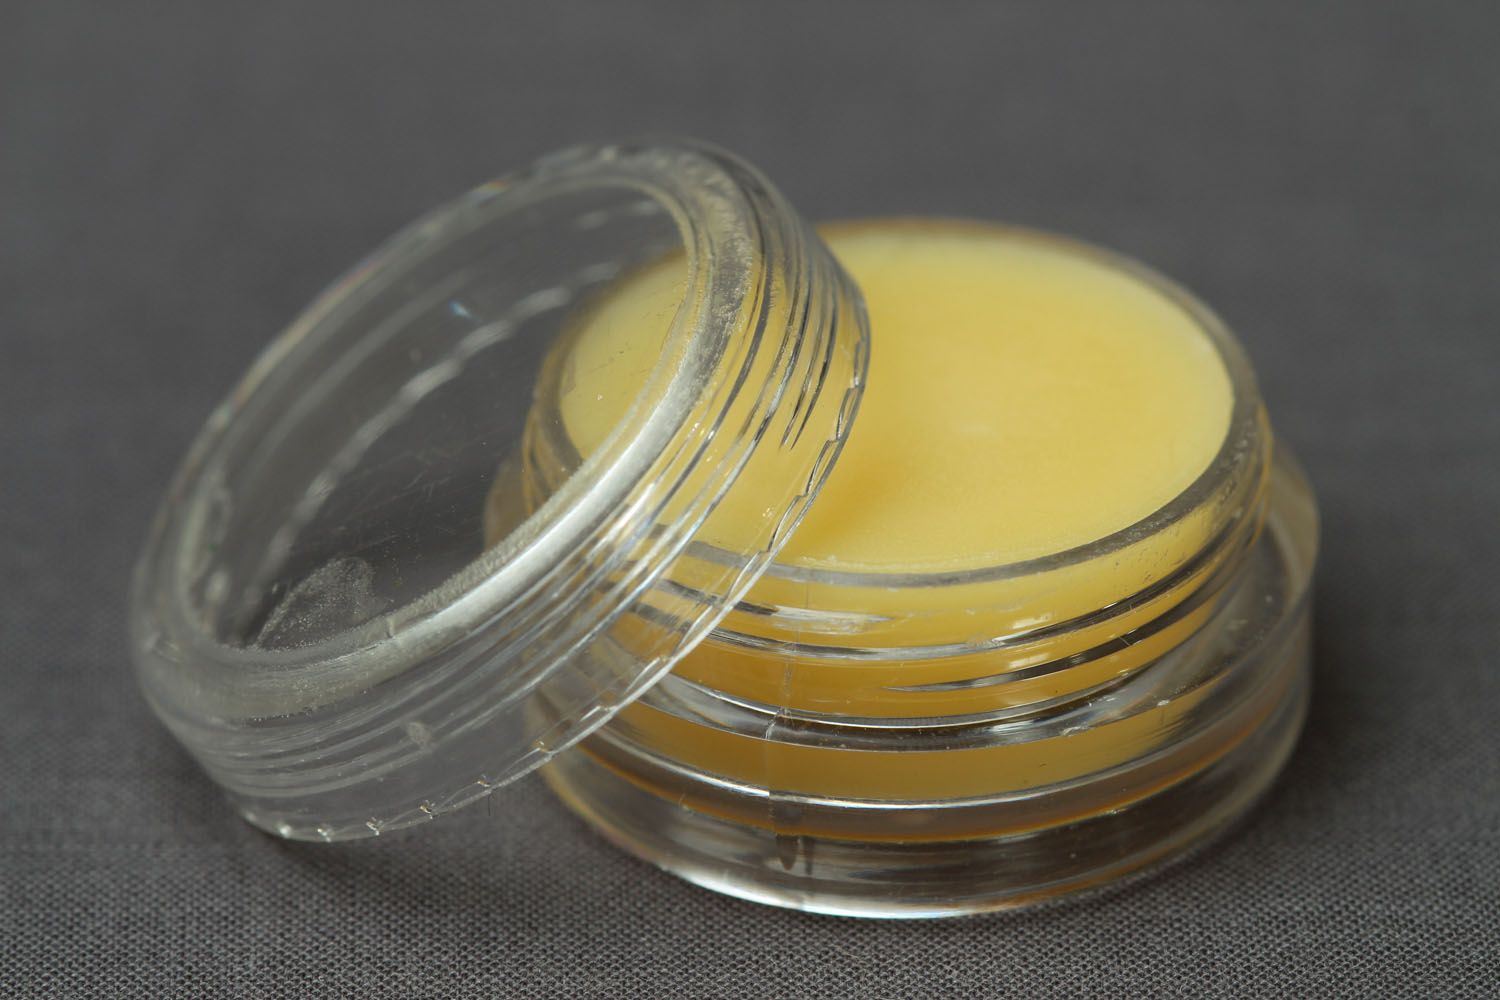 Solid floral perfume photo 1